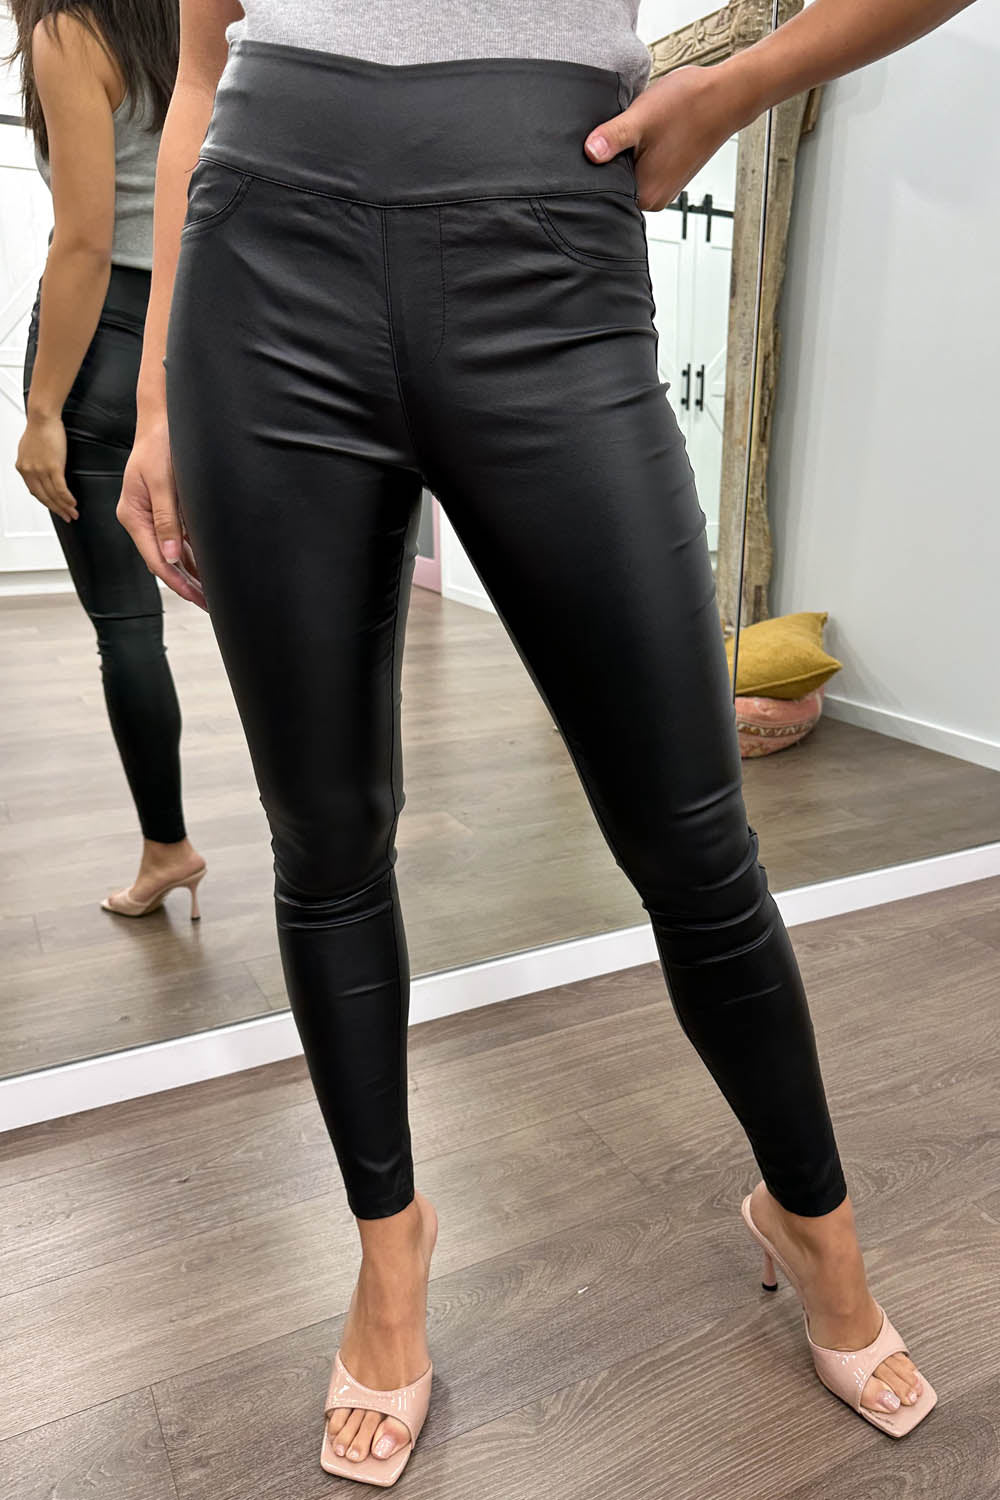 New Womens Wet Look Leather-Look High Waist Leggings Sexy Plus Size  Jeggings